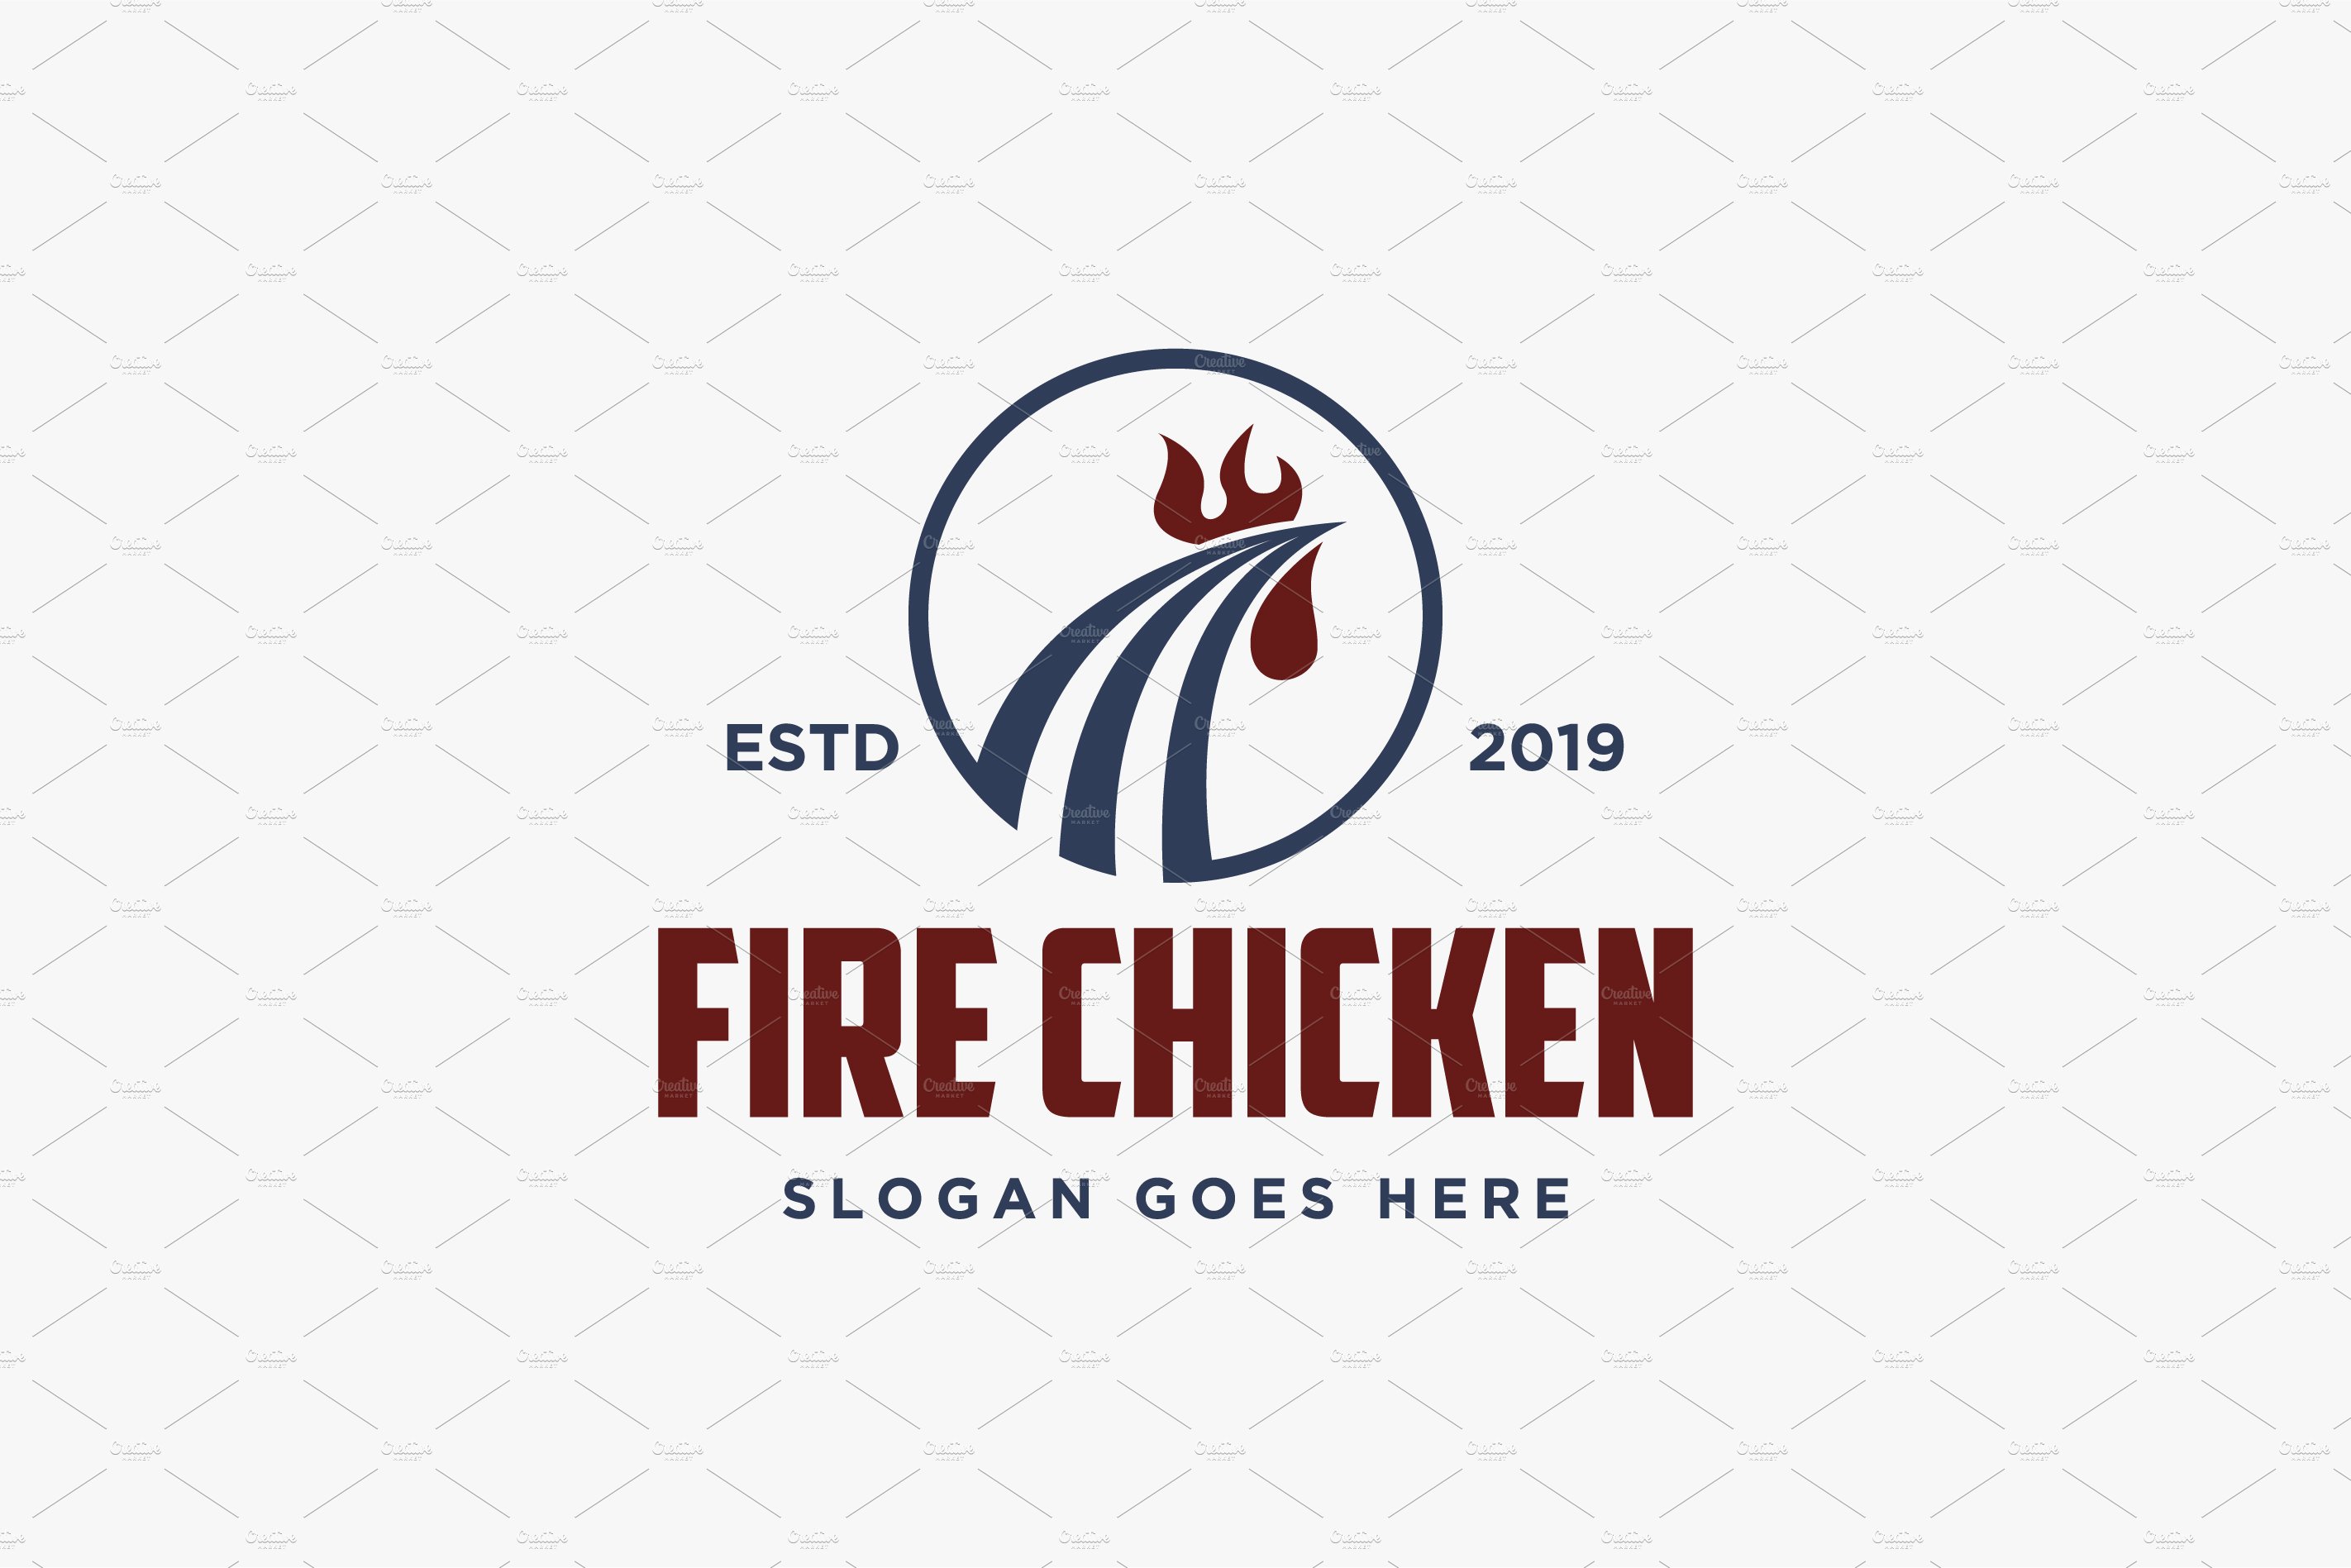 hot fried chicken logo vector cover image.